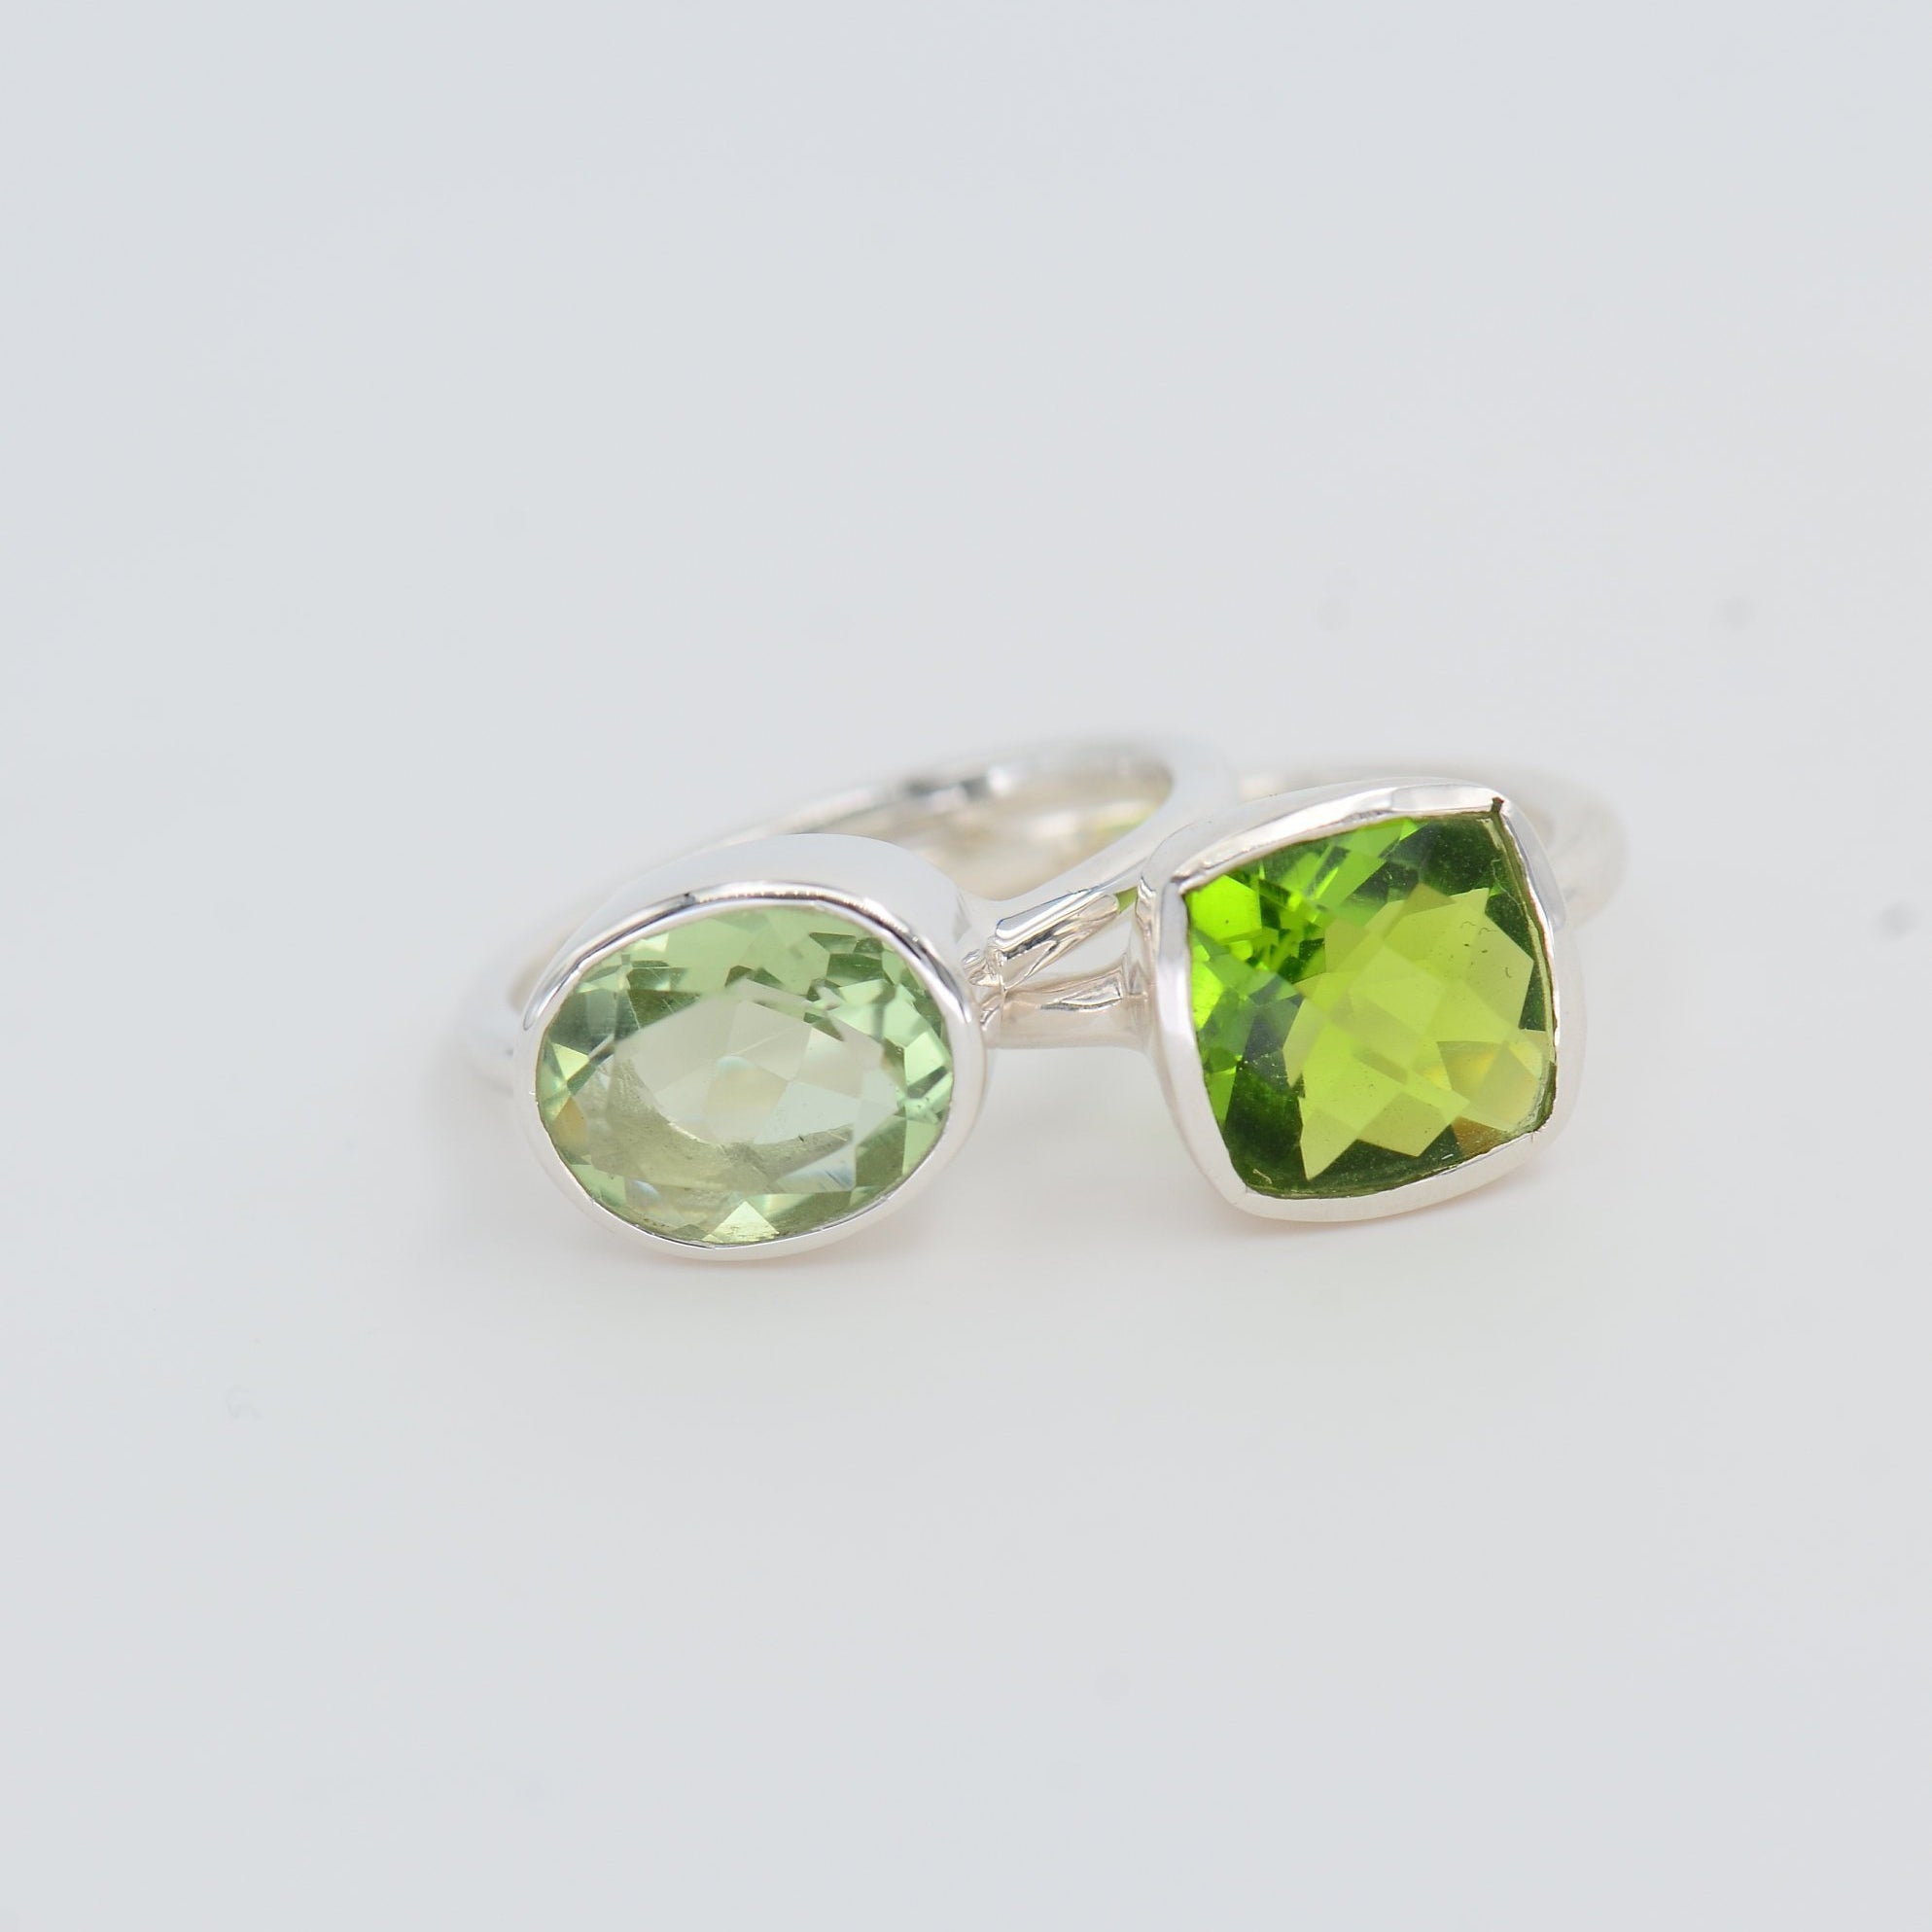 Green Amethyst Ring, Peridot Ring, August Birthstone ring, Sterling silver stackable Ring, Everyday Ring, Bezel set ring, Square ring